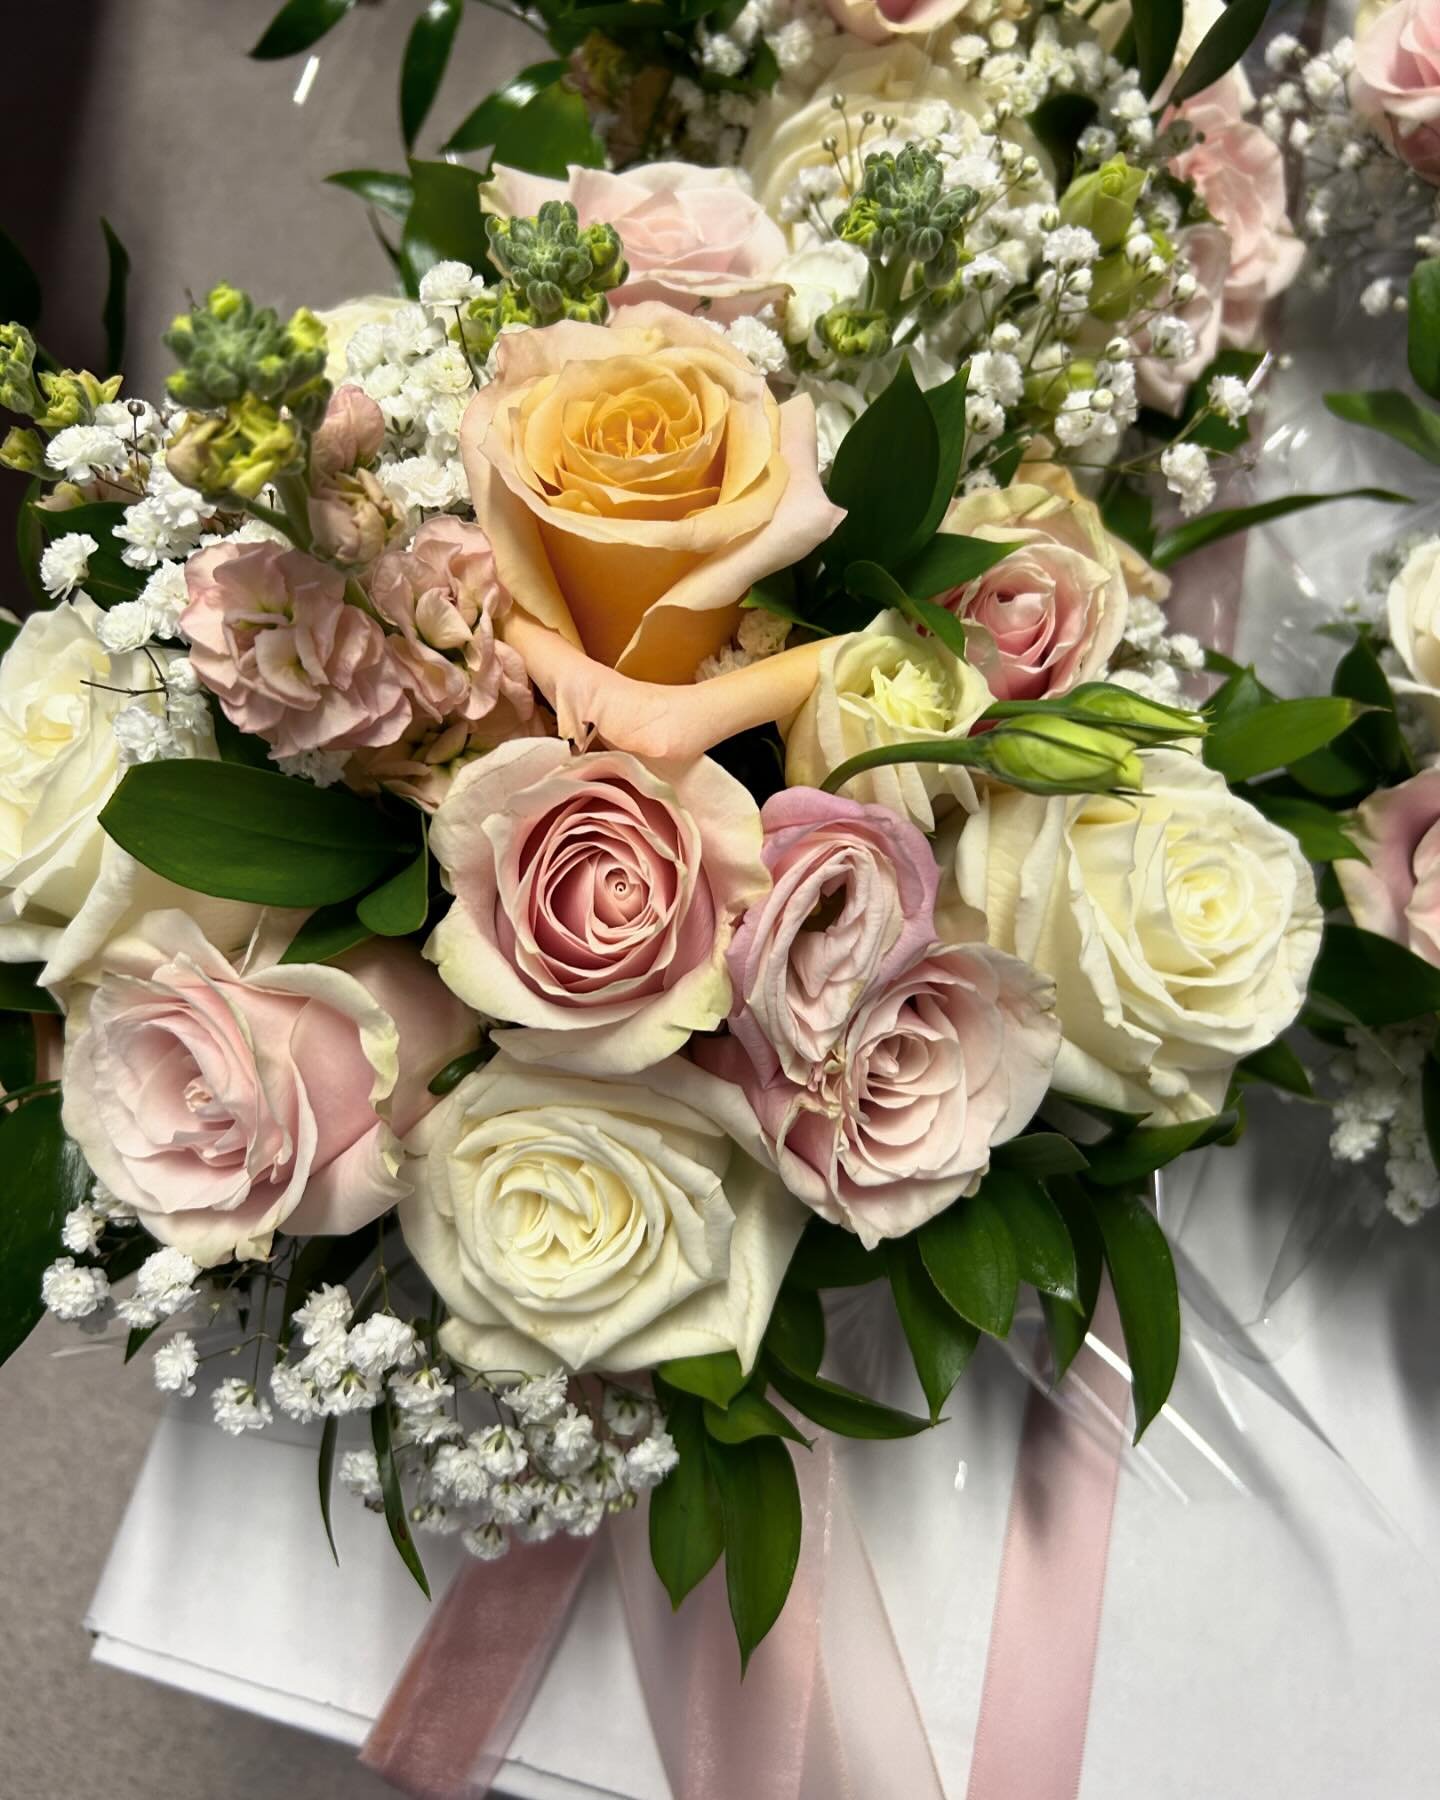 Gema chose a beautiful soft mix of of pink peach and white for her wedding bouquets and buttonholes today.
Flowers. It&rsquo;s what we do 🌷

We also added in a sma box of flat lay flowers for her photographer. 

#bridalbouquets
#butyonholes